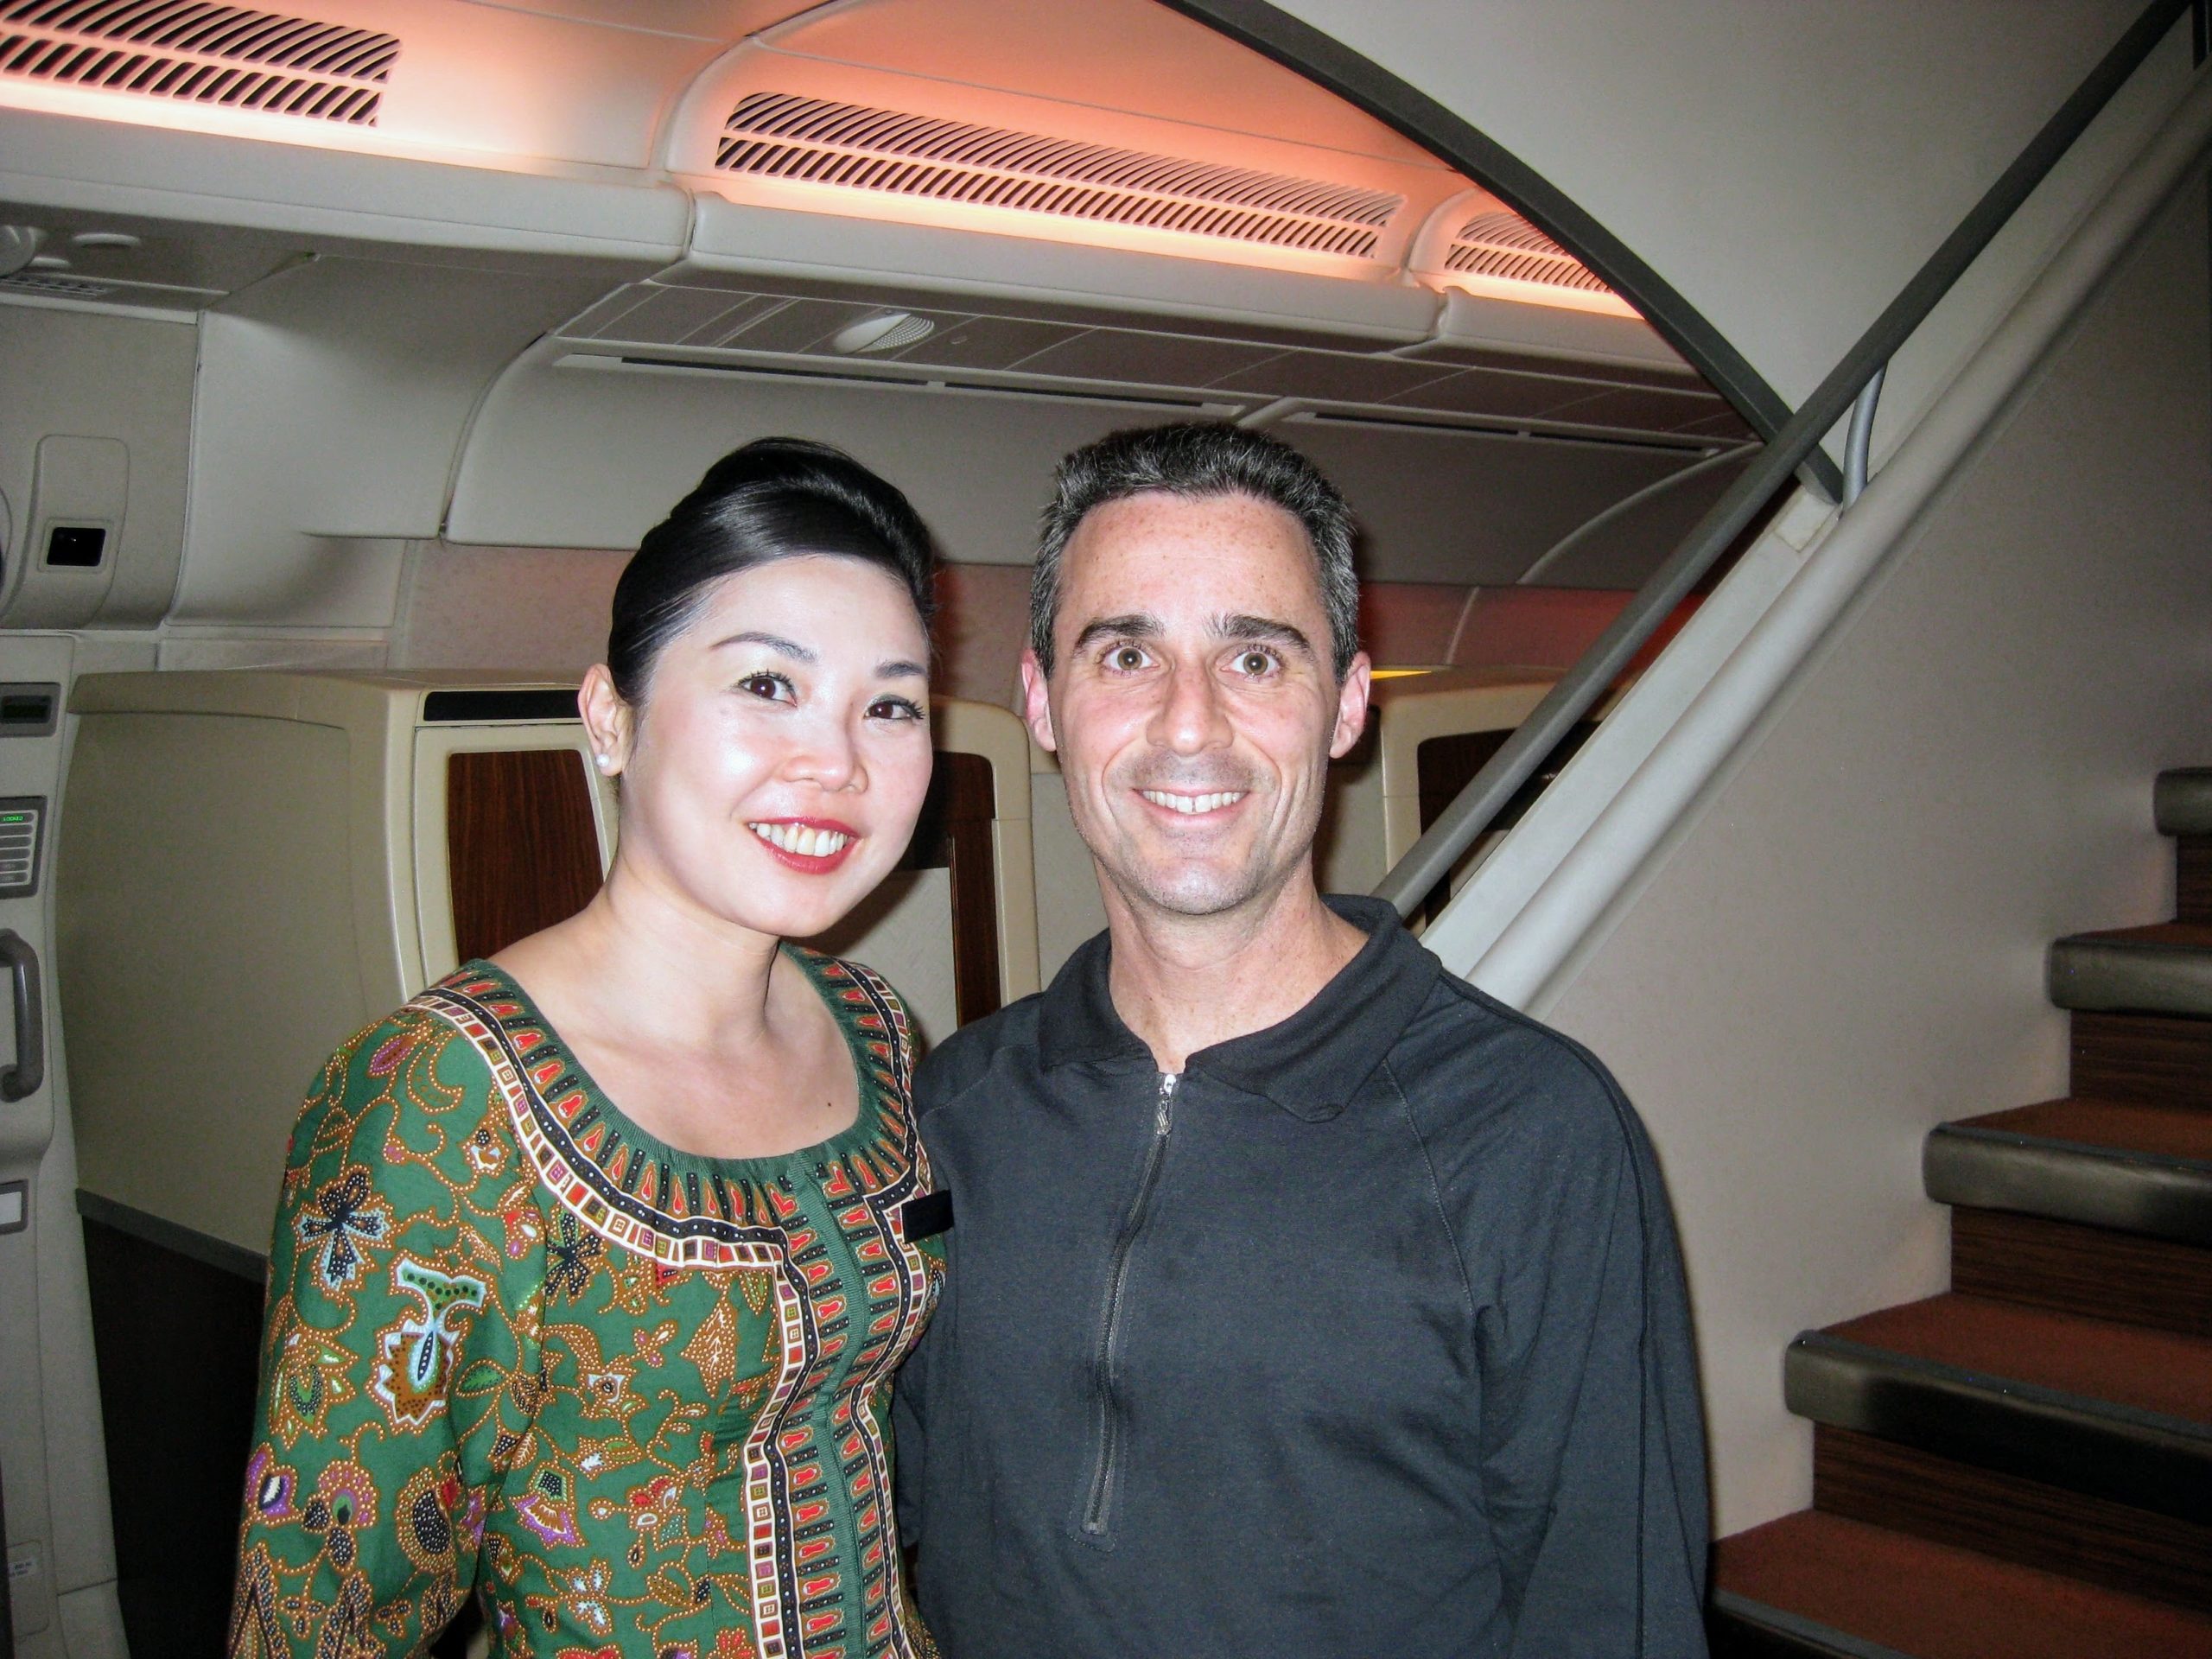 a man and woman standing together in an airplane